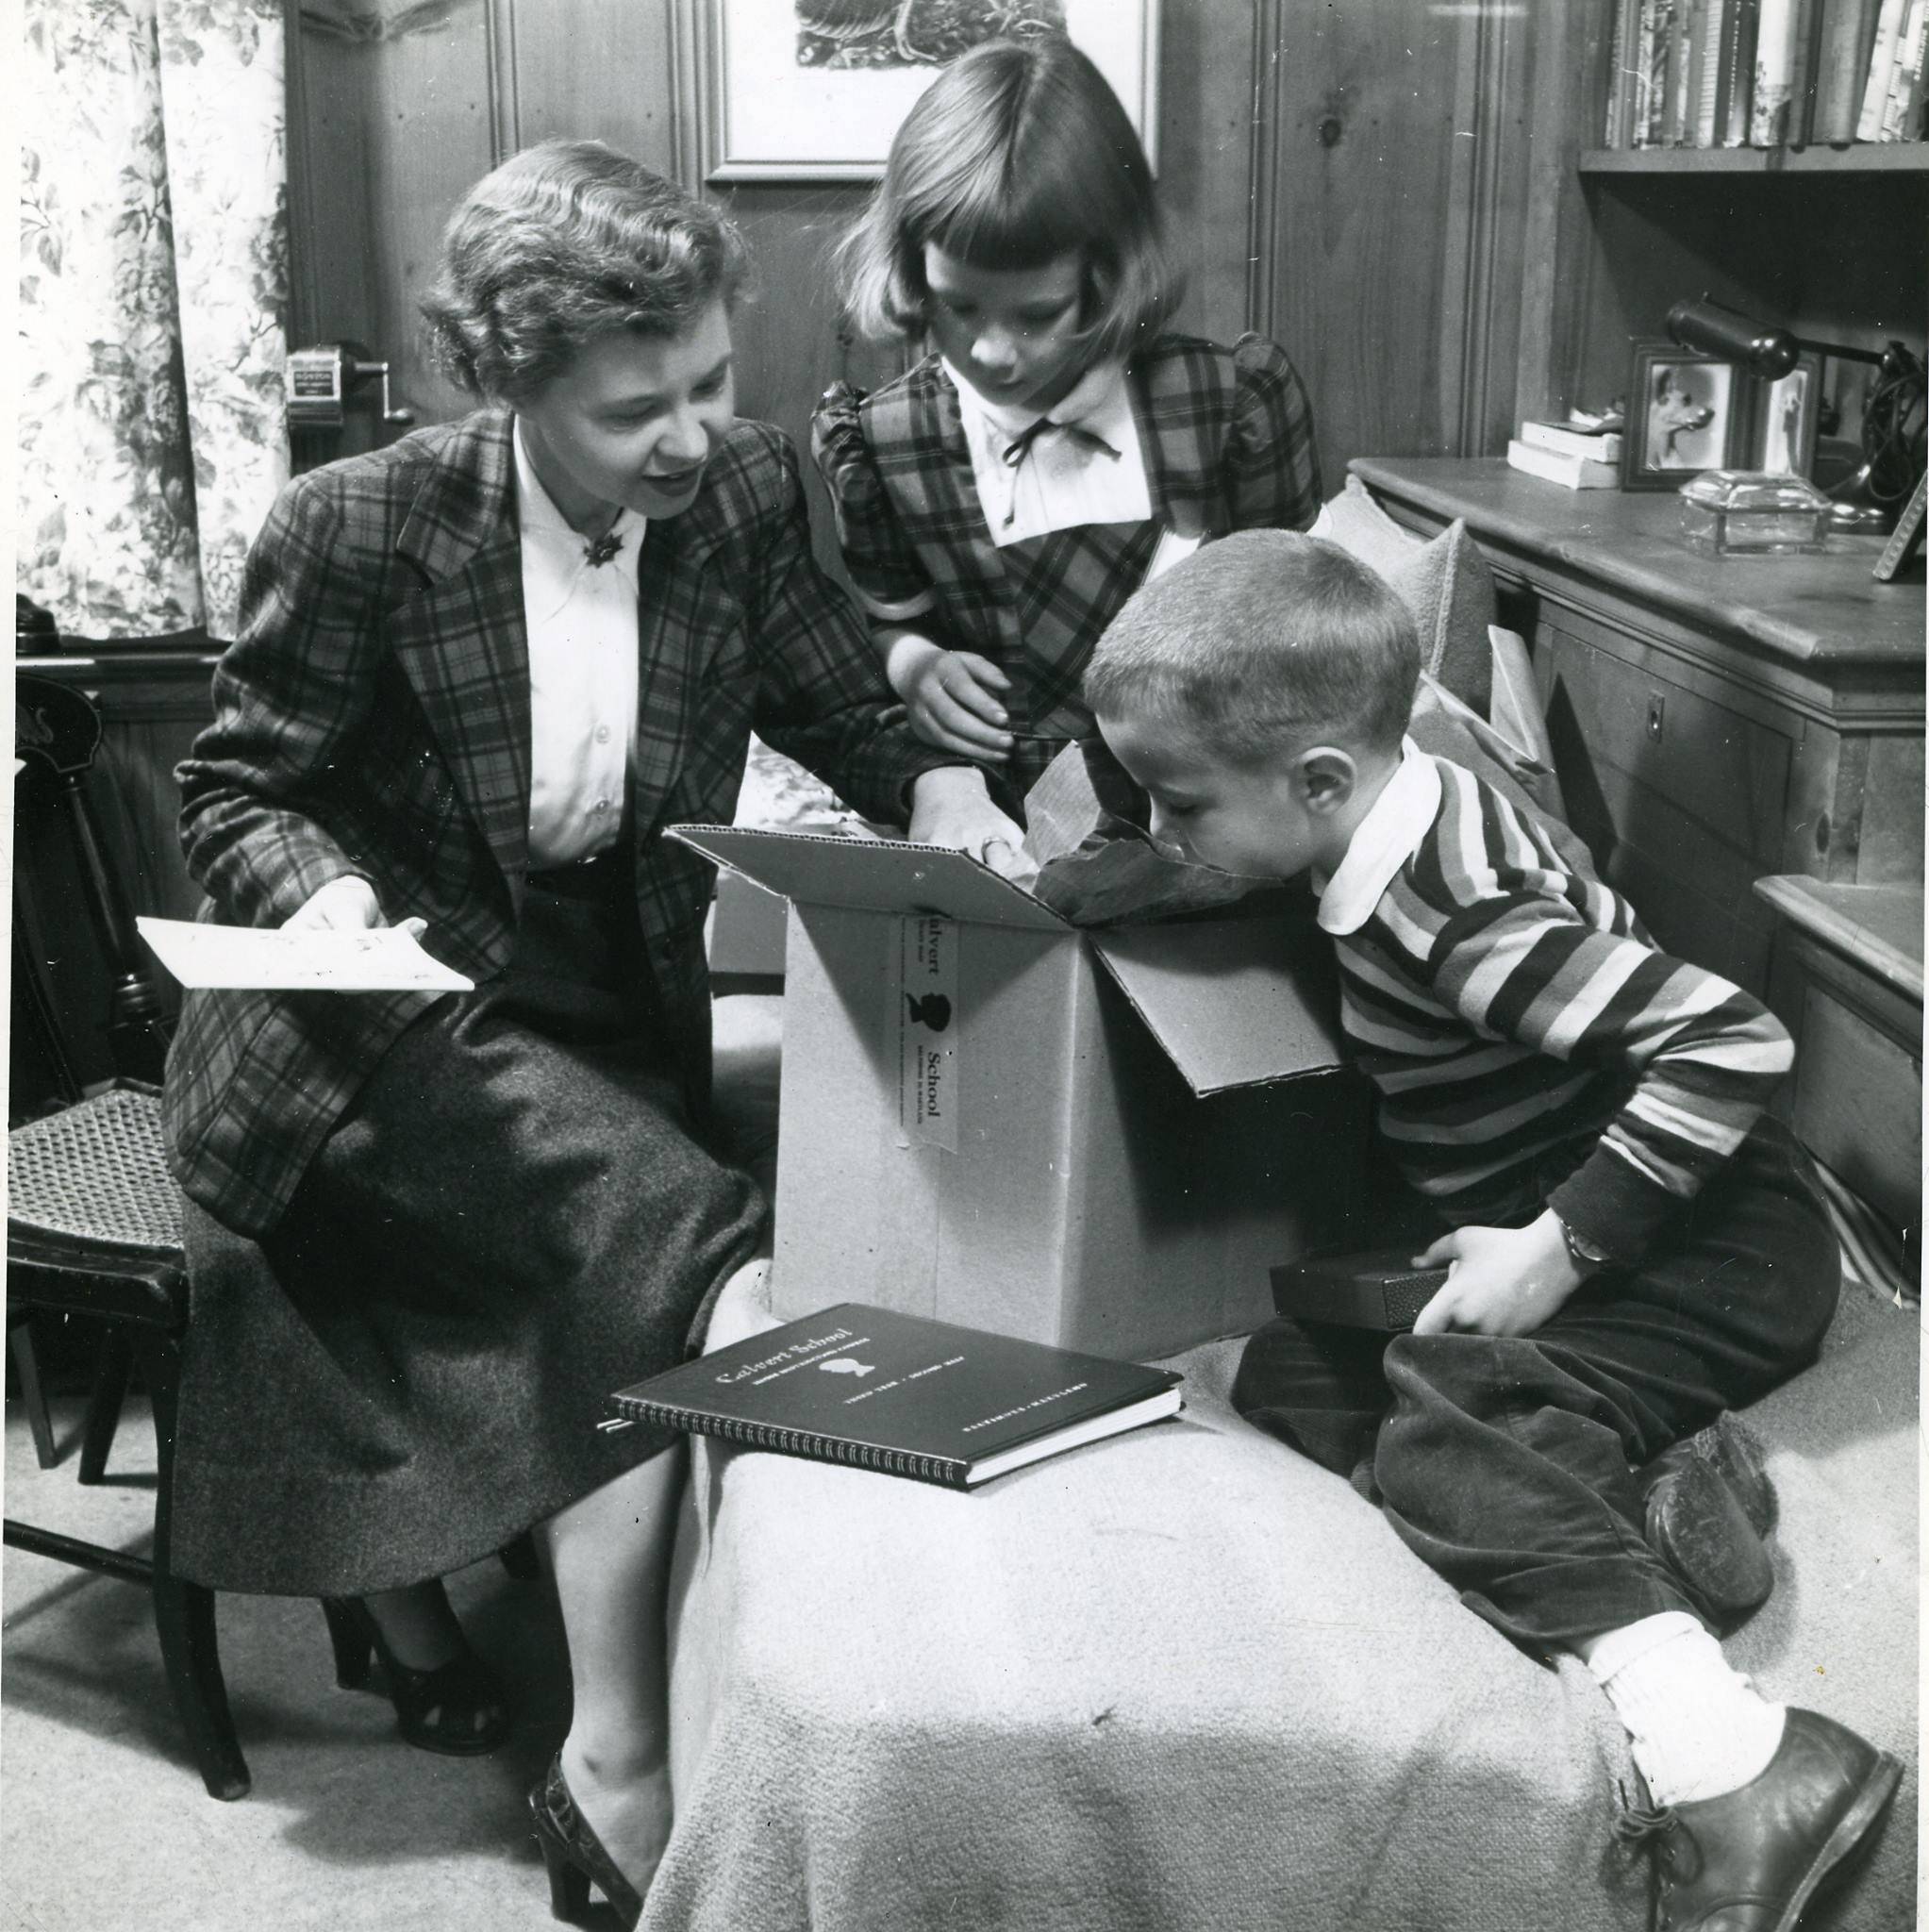 This photo of Mrs. “Nippy” Eason and two of her children became a well-known image used in Calvert’s advertisements for home learning. These advertisements were used in print publications such as McCalls magazine and National Geographic.